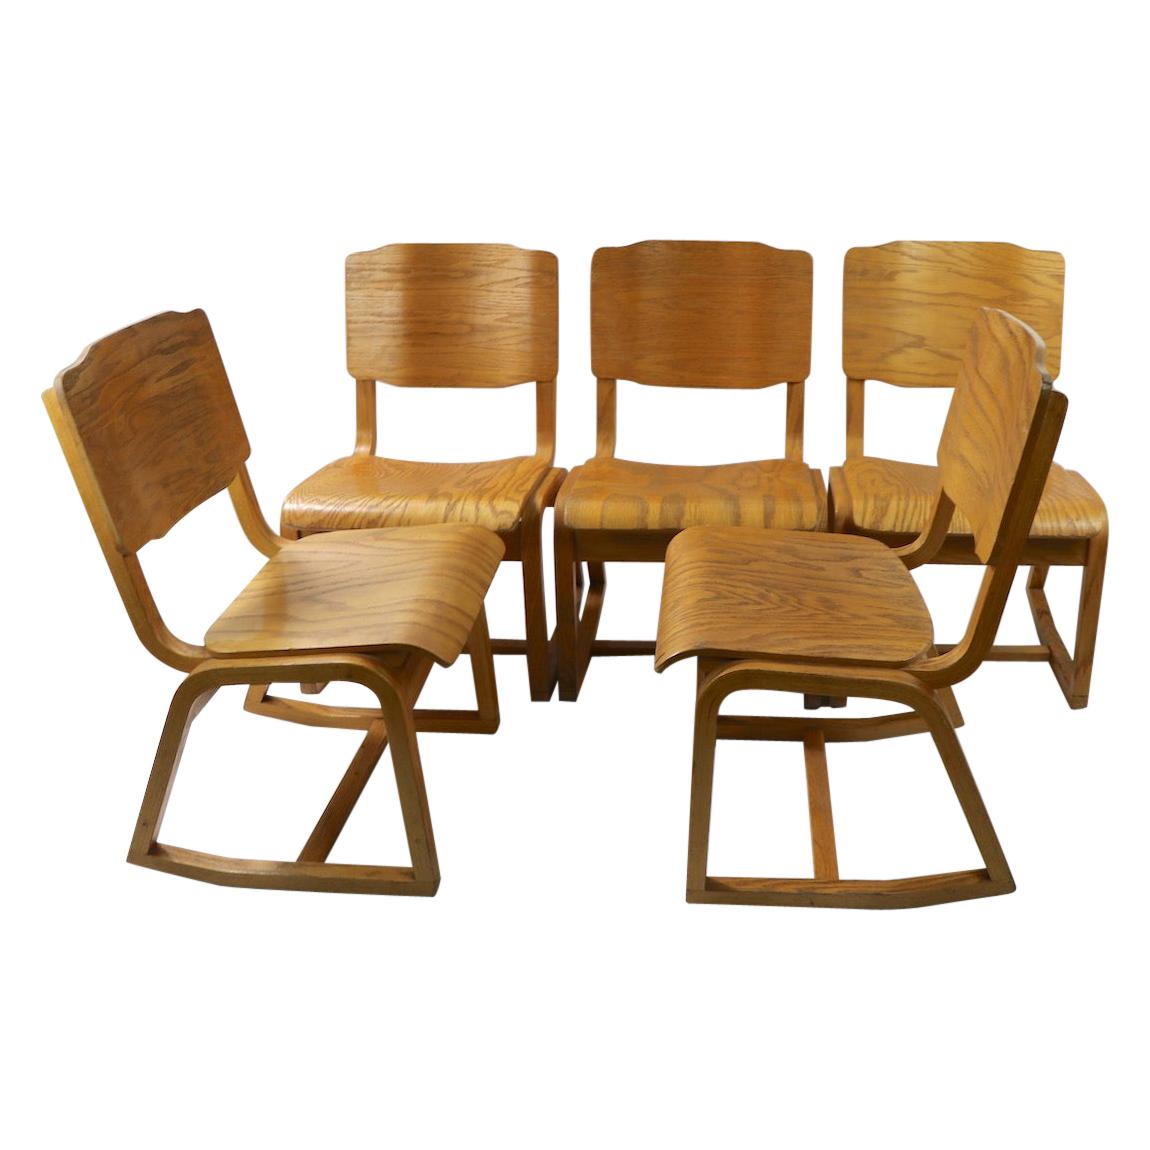 3 Mid Century Bentwood Chairs Attributed to Thonet